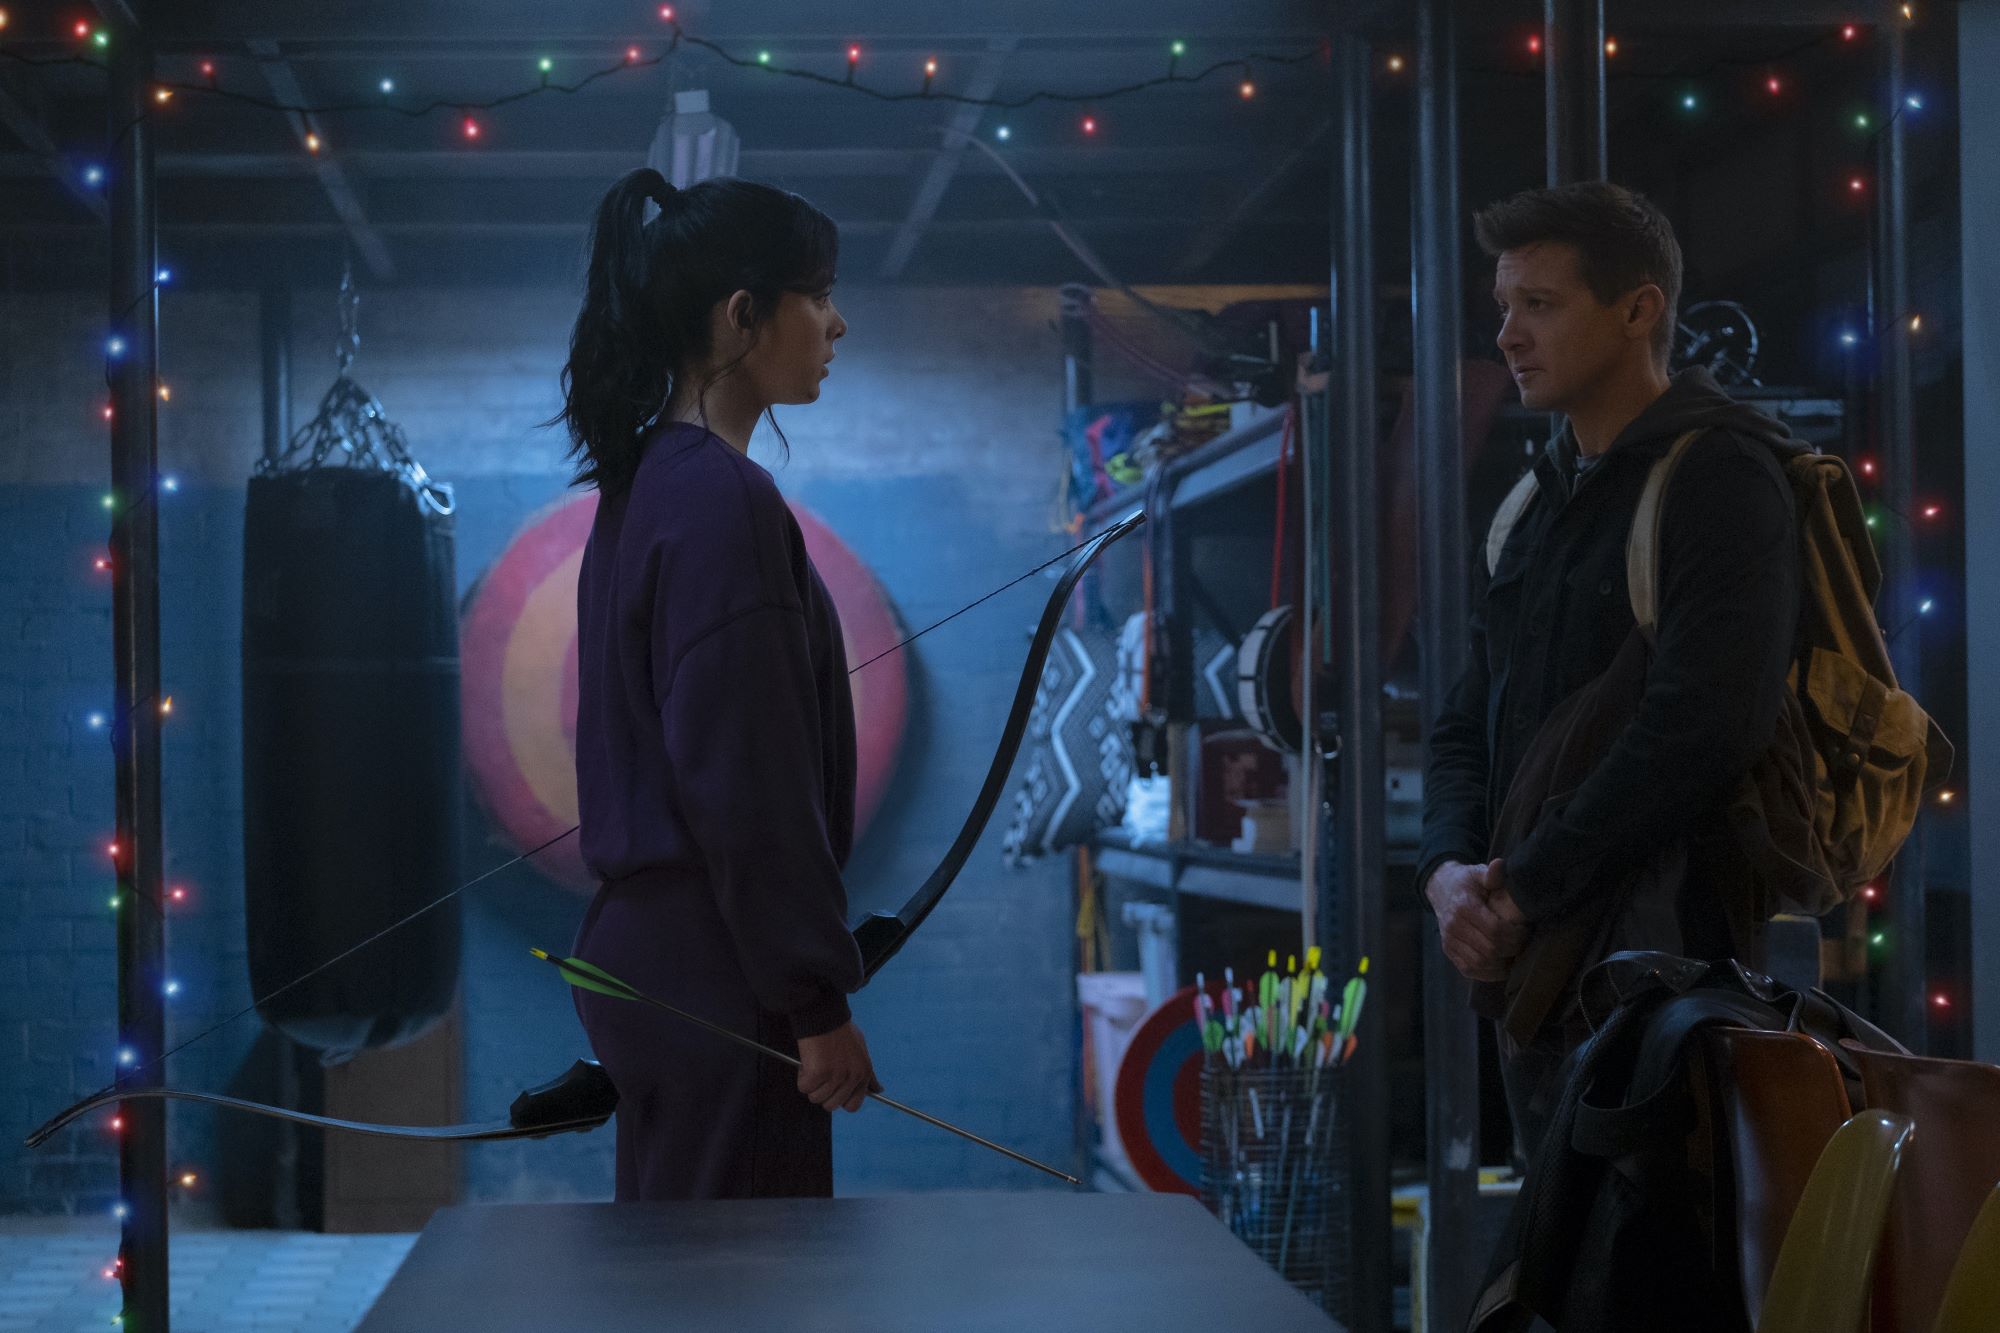 'Hawkeye' stars Hailee Steinfeld and Jeremy Renner, in character as Kate Bishop and Clint Barton, stand in a training room with Christmas lights. Steinfeld wears a purple sweater and purple sweatpants and holds a bow and arrow. Renner wears a dark jacket and a backpack.